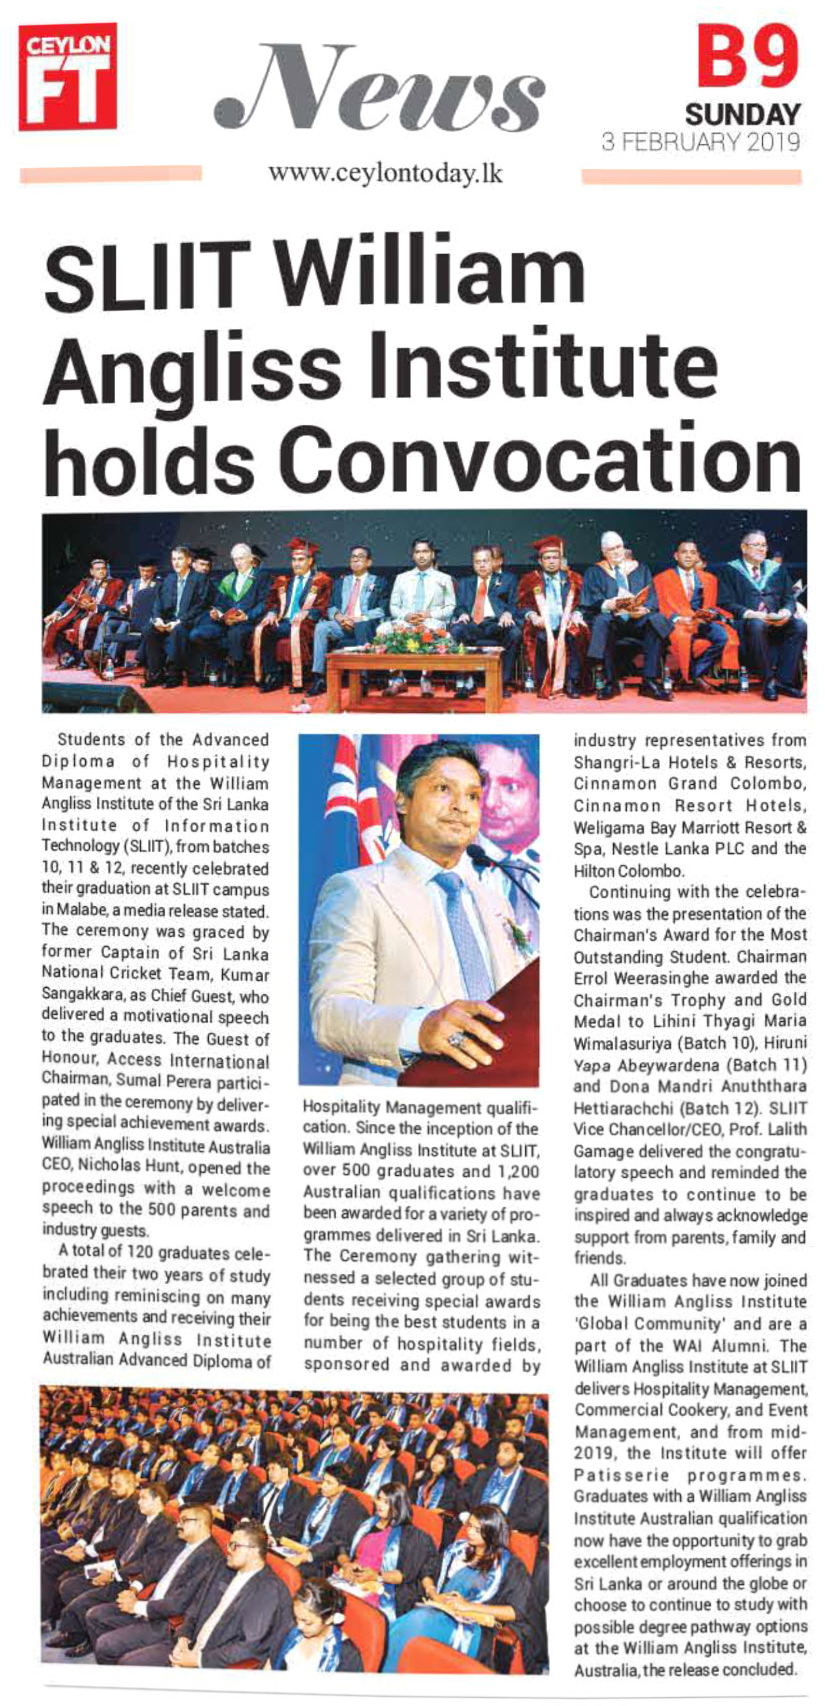 SLIIT-William-Angliss-Institute-Holds-Convocation-Ceylon-Today-FT